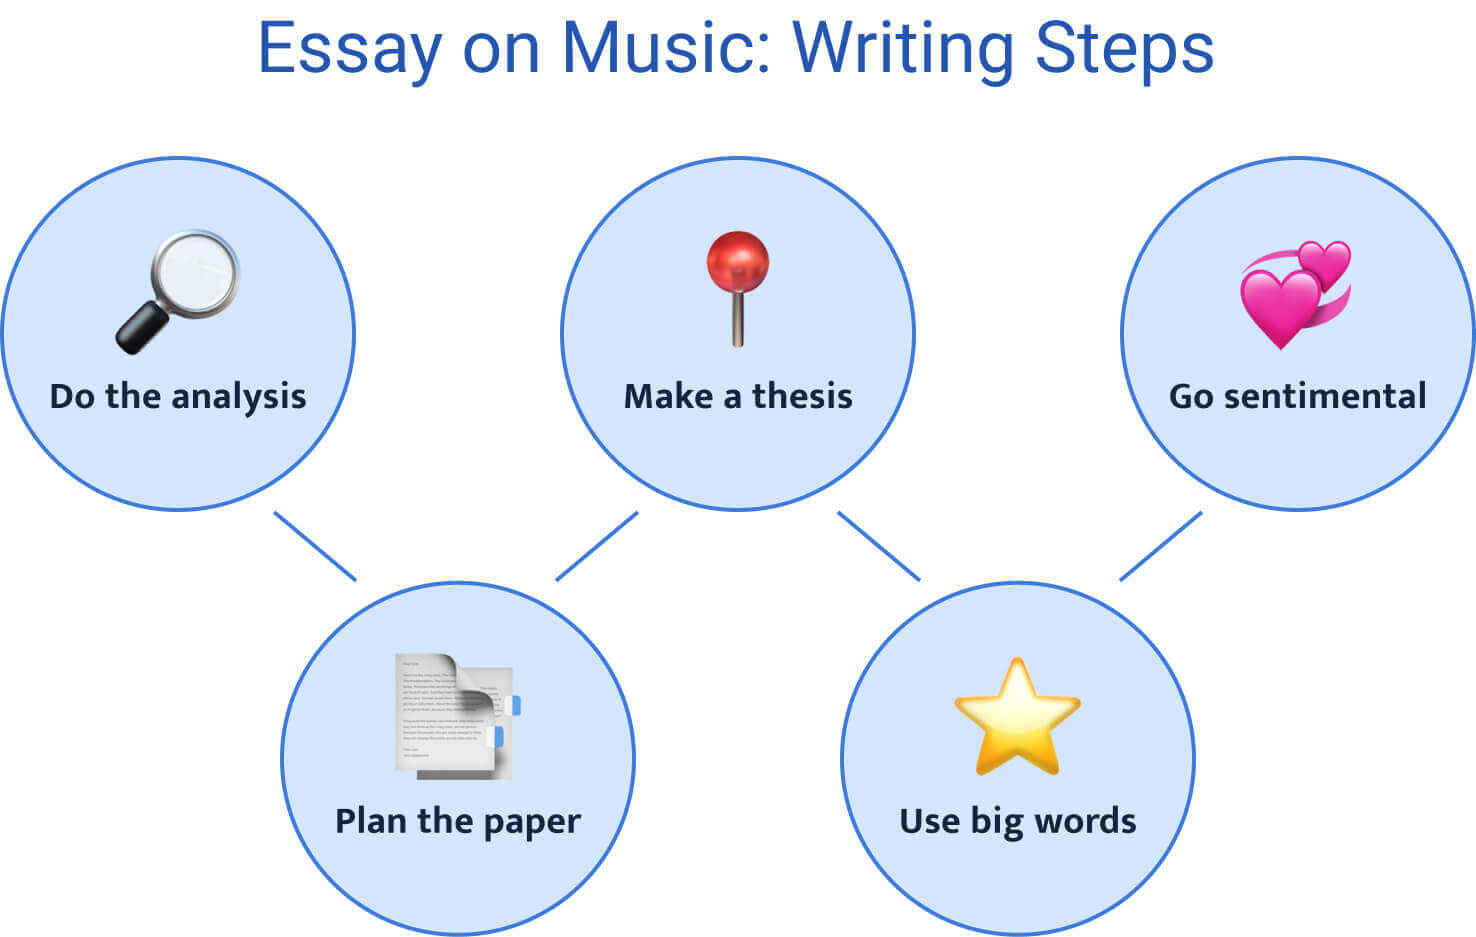 The picture contains the five steps necessary to write a music essay.